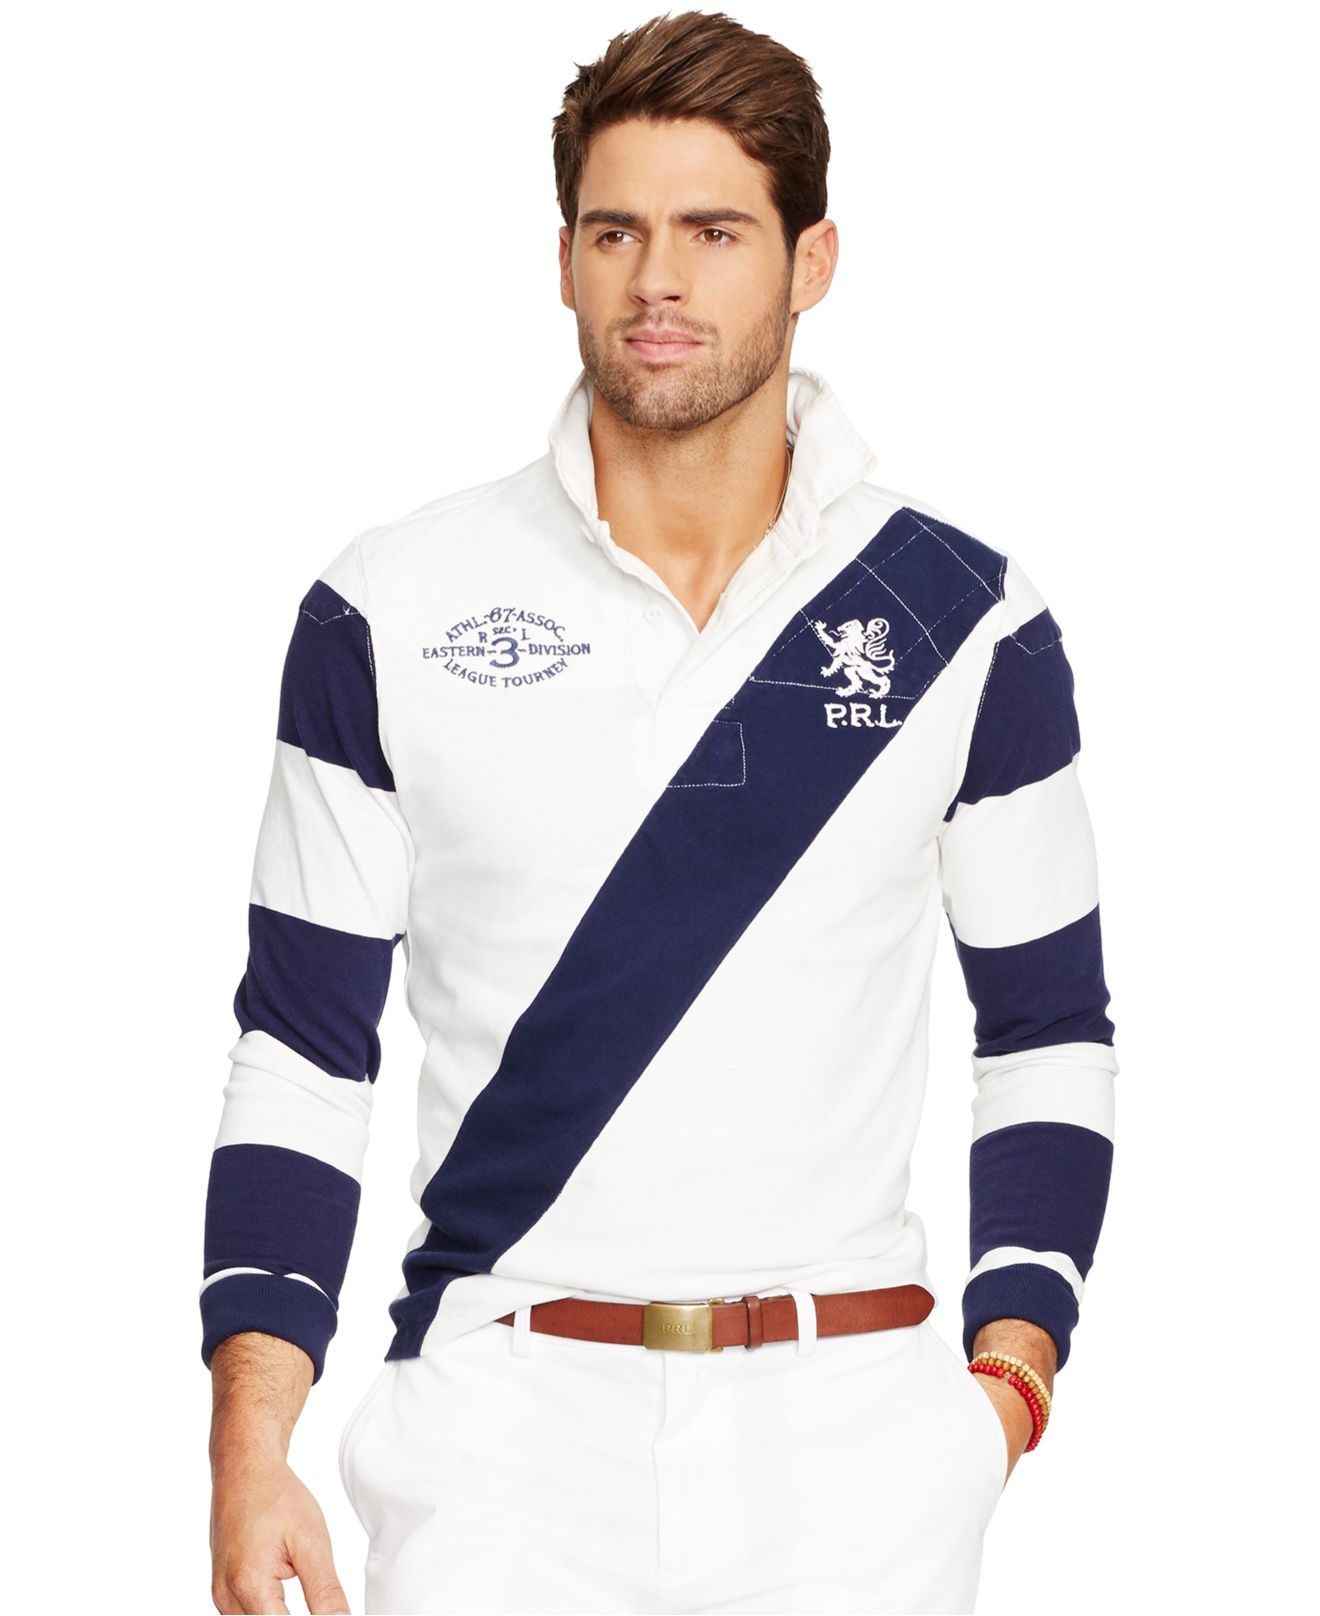 Lyst - Polo Ralph Lauren Banner-Striped Rugby Shirt in ...